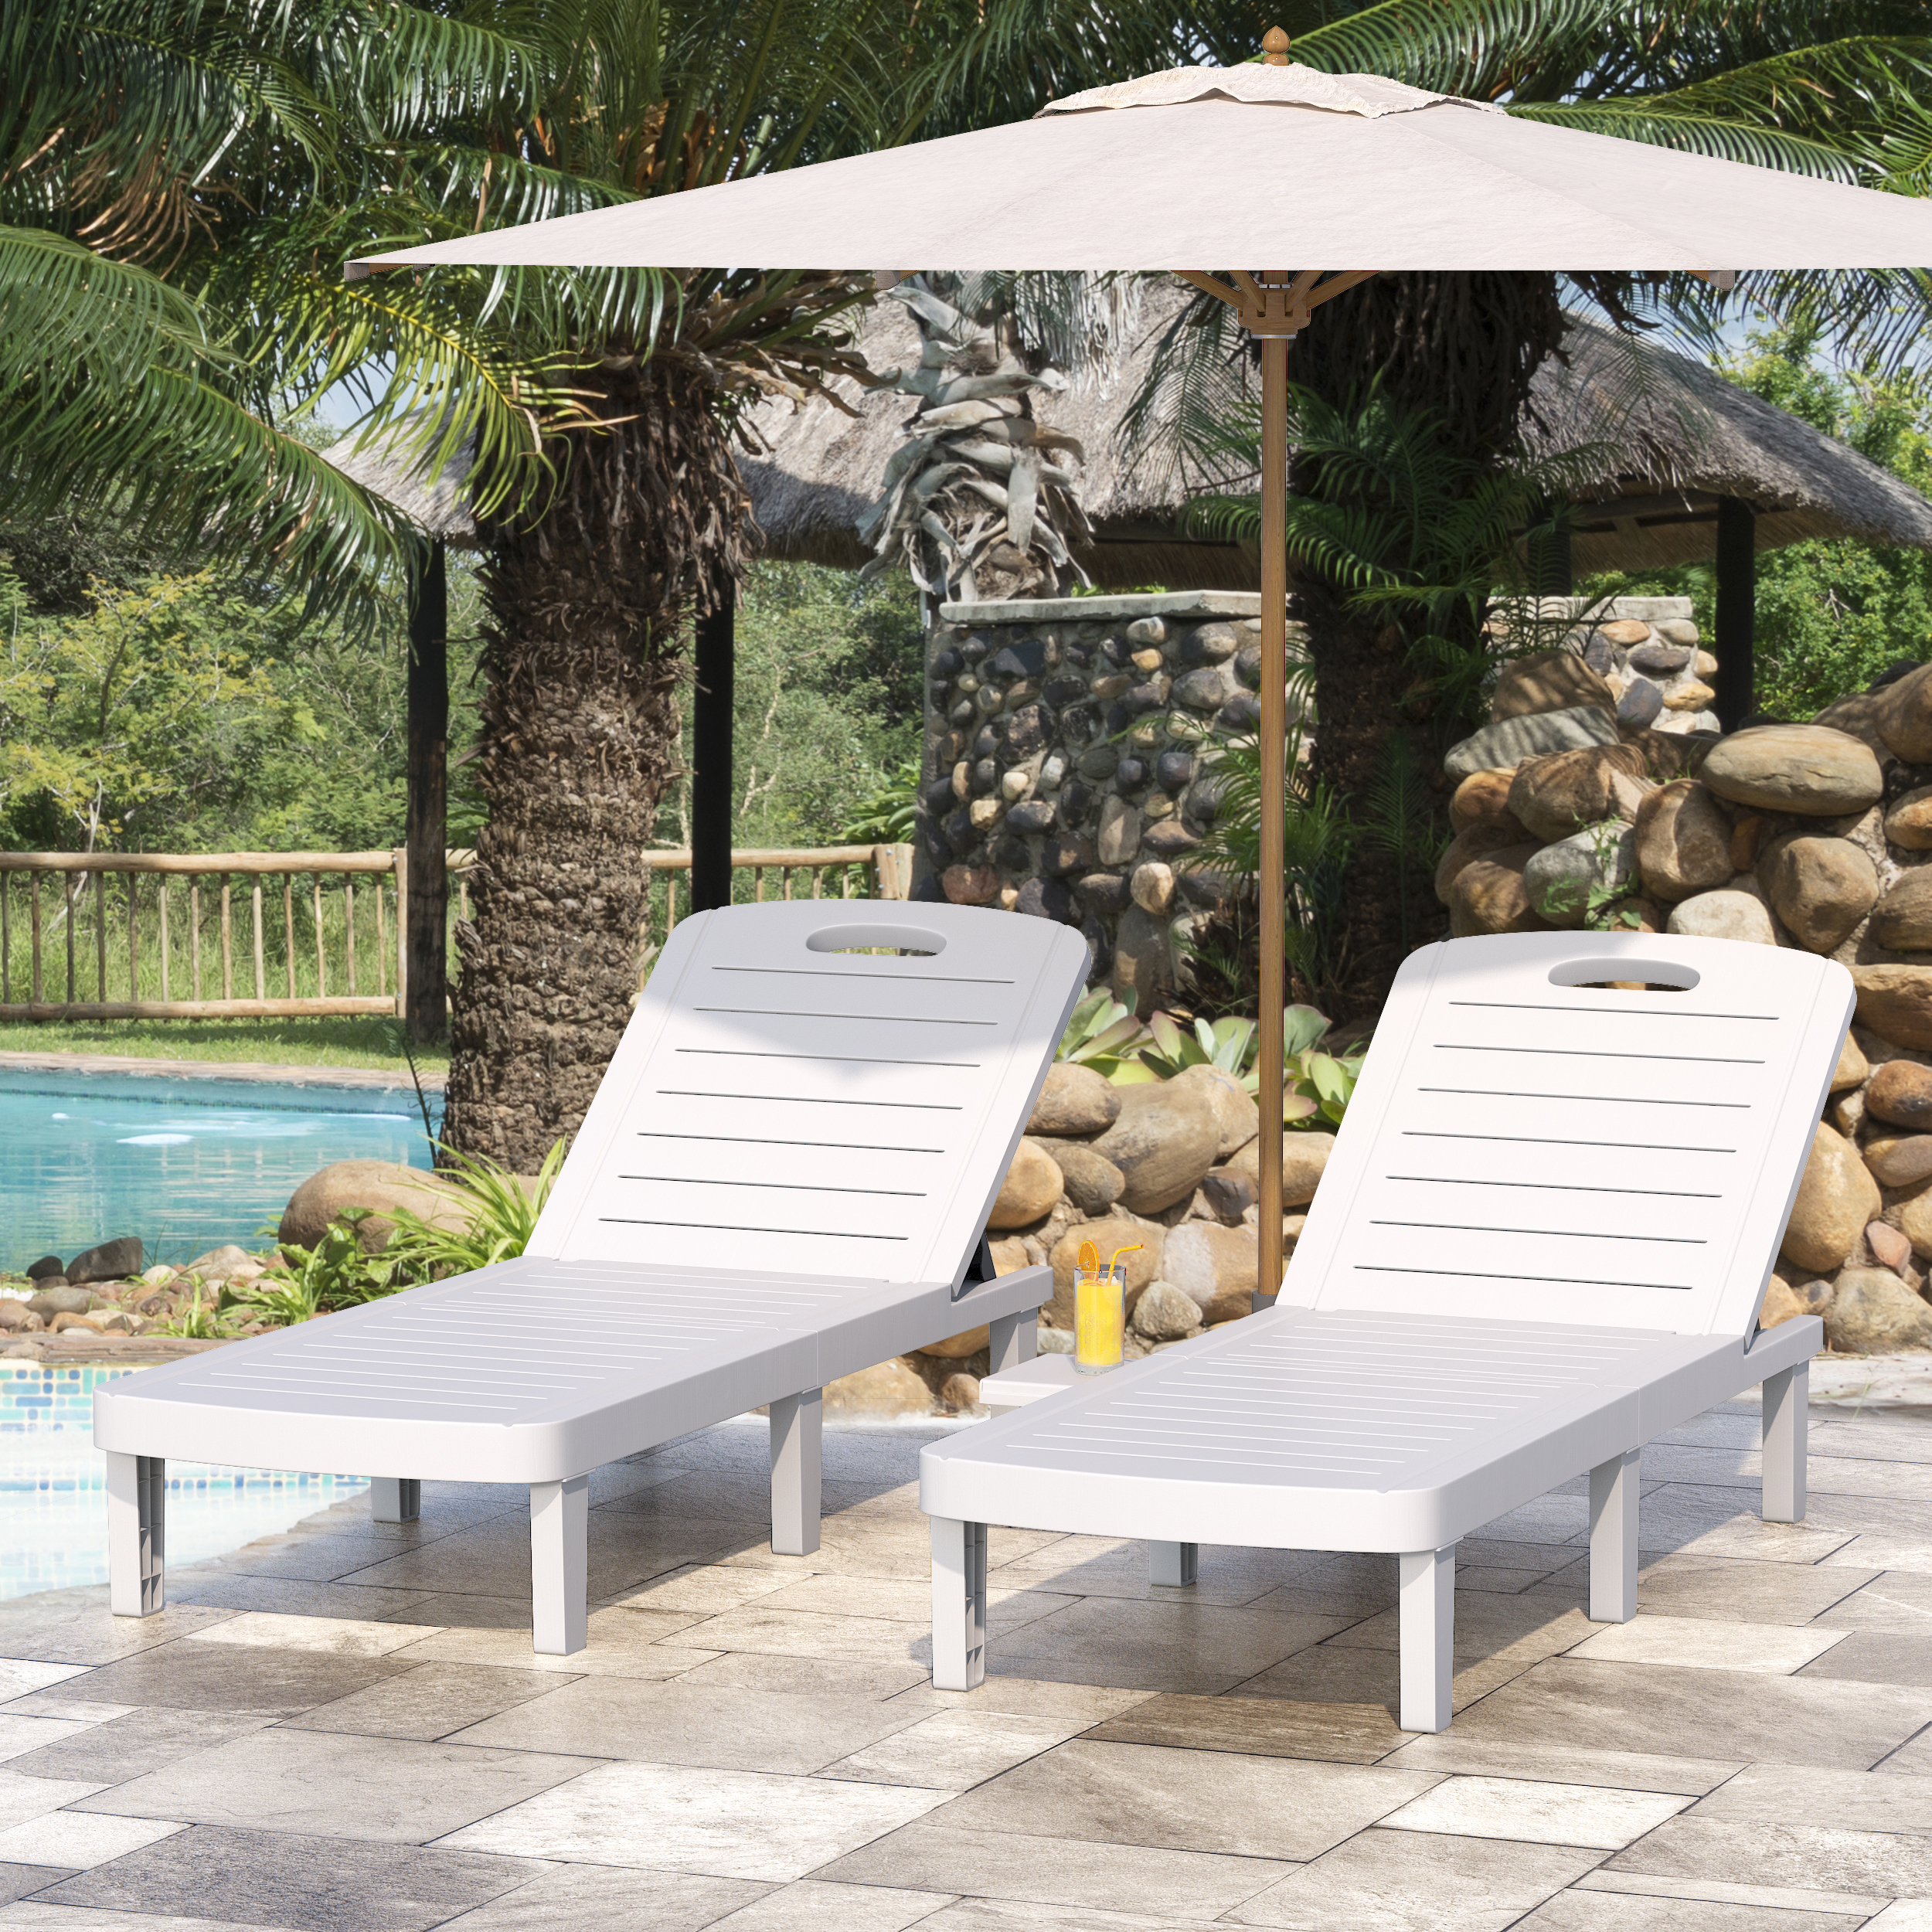 Set of 2 Patio Chaise Lounge, Outdoor Pool Lounge Chair for 2, Layout Chair Outdoor Furniture Adjustable with 5 Positions | Side Table | Max Weight Capacity 330 lbs White - image 1 of 11